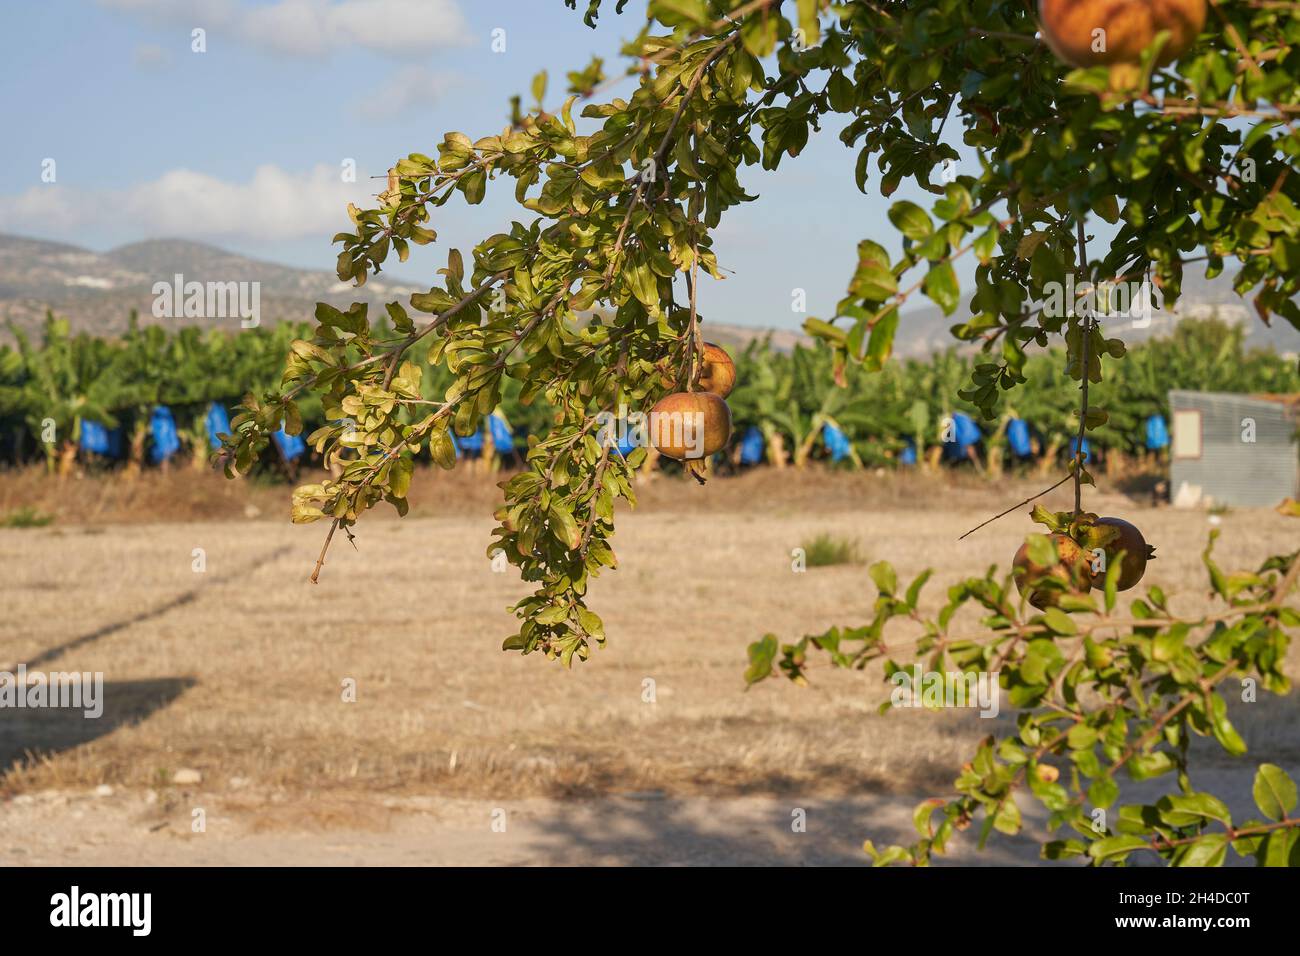 Photograph of pomegranate fruit hanging from branch of tree with banana tree plantation and blue sky out of focus in background Stock Photo